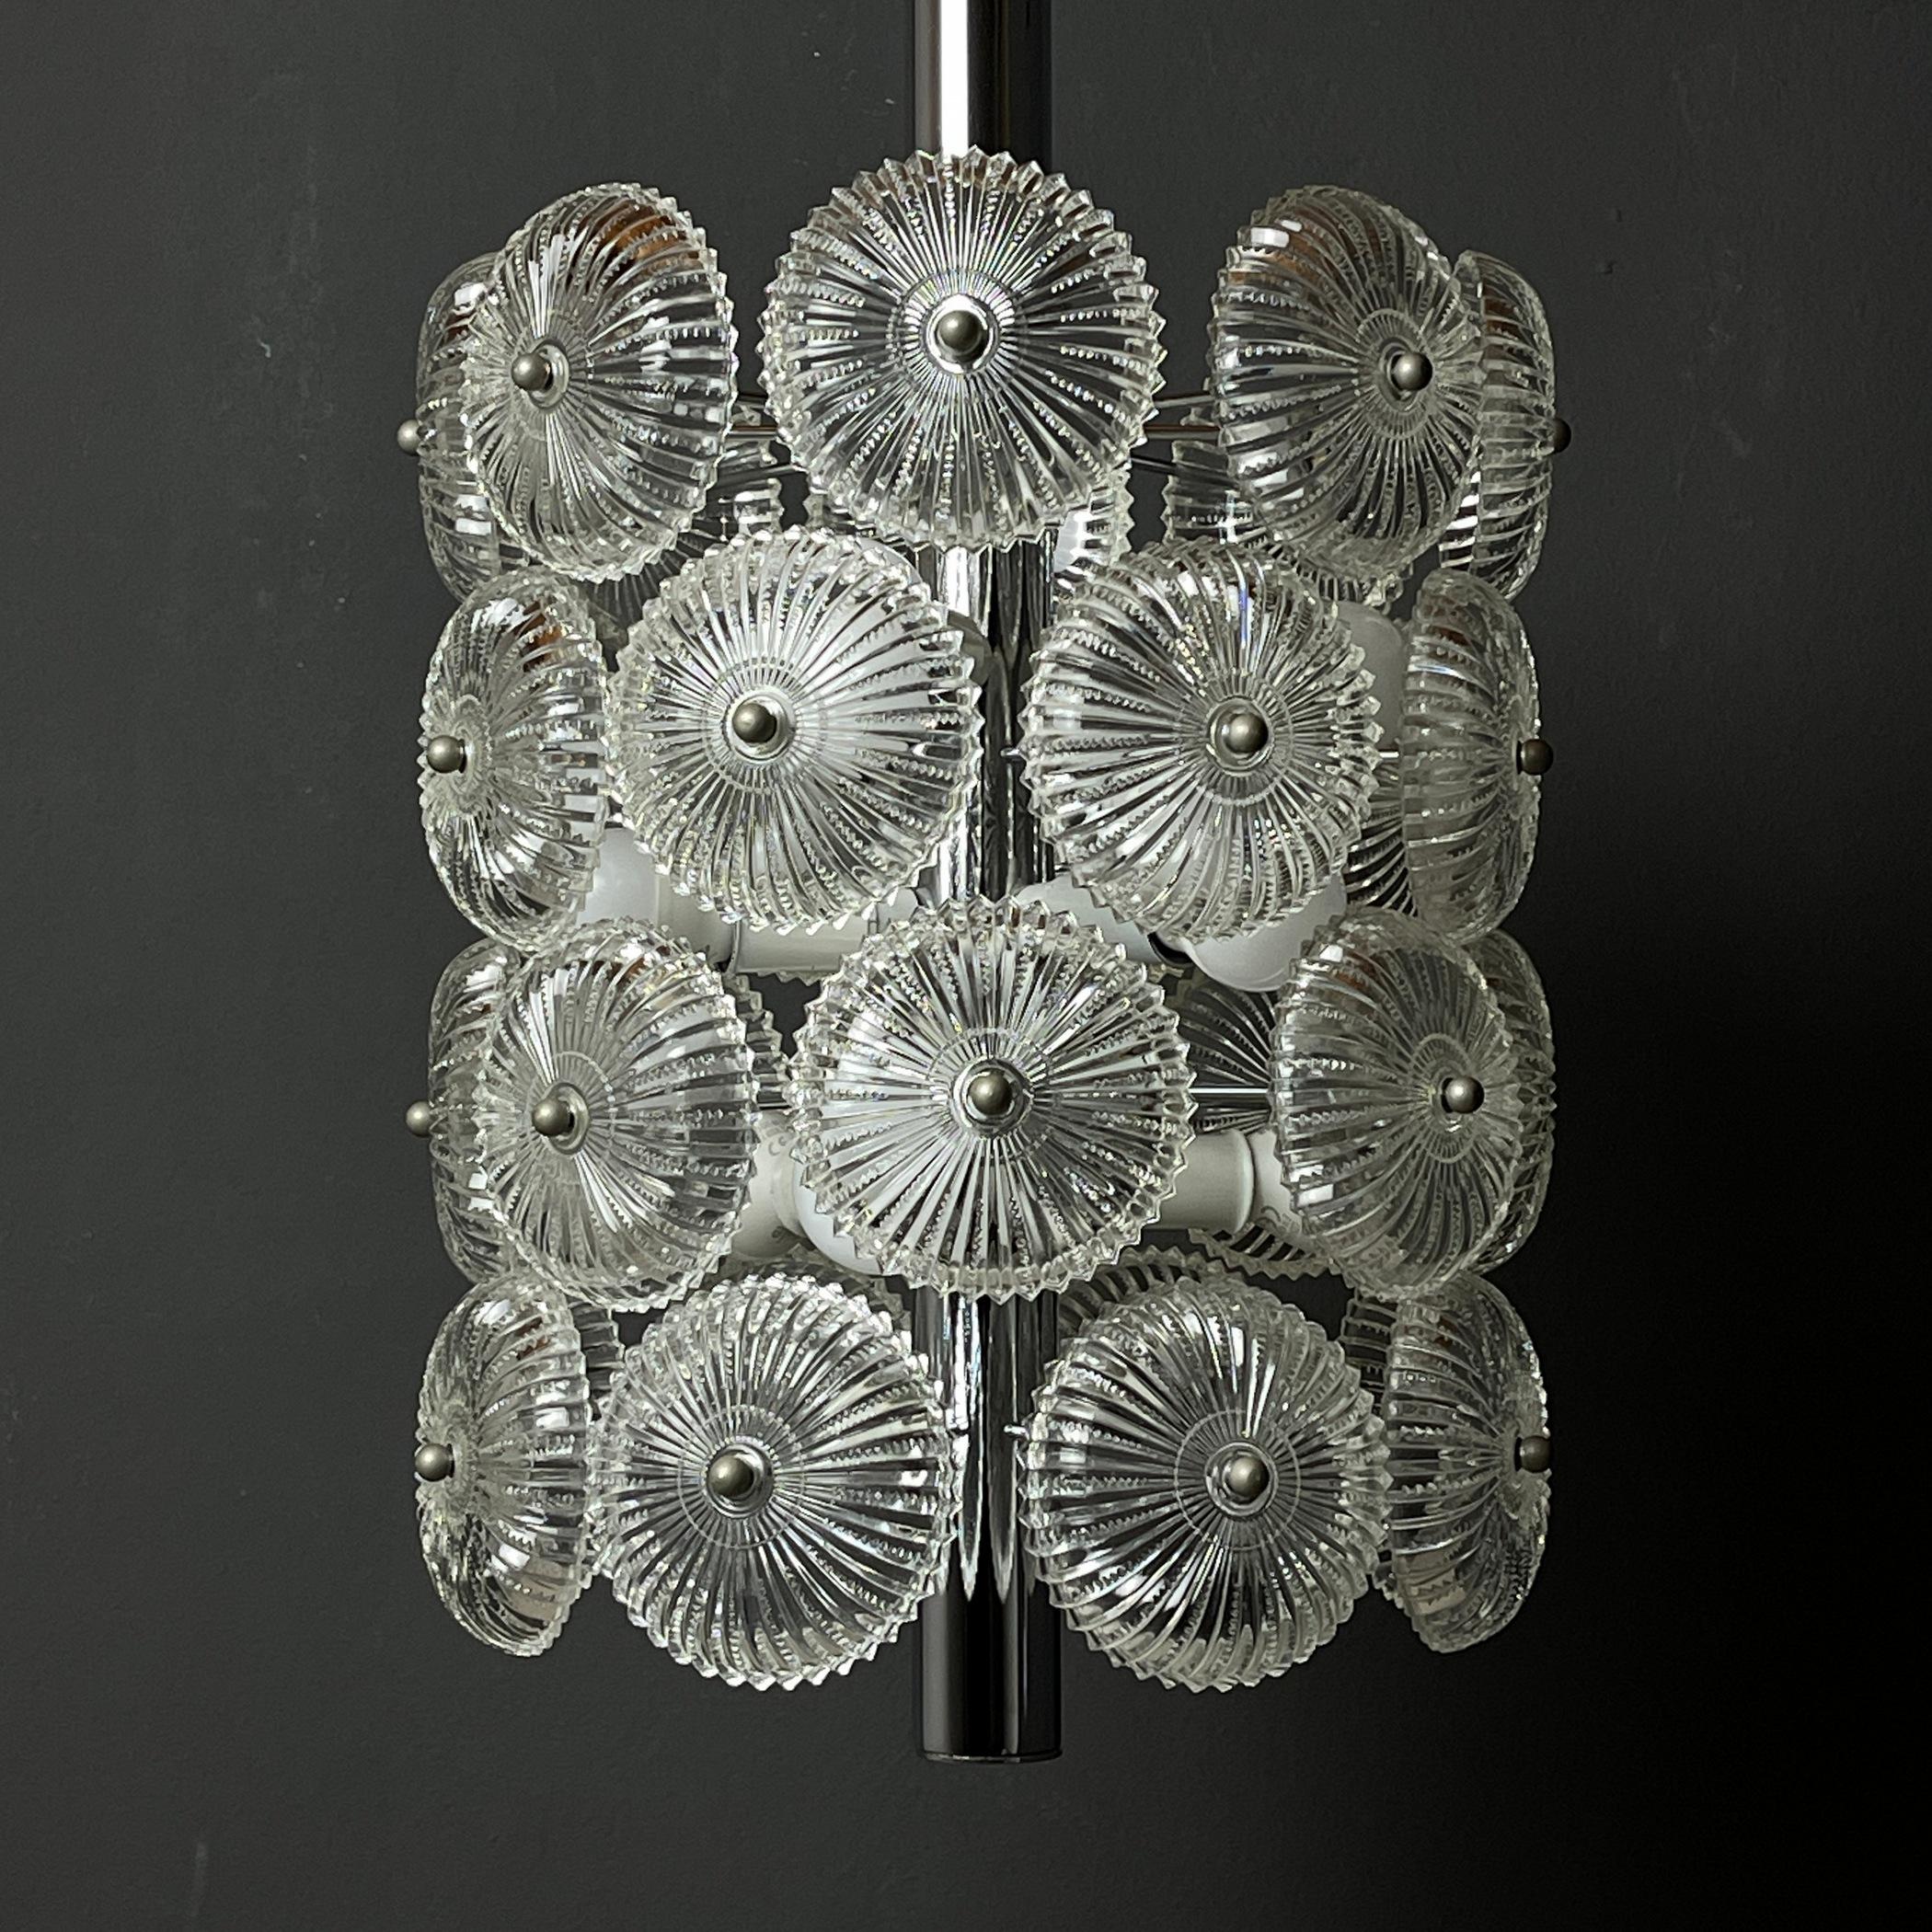 Unique vintage crystal chandelier Dandelion made in Italy in the 1960s.
Four-tier metal base and 32 glass elements. The chandelier has a simple, clean design that makes it the perfect choice to decorate and illuminate any room of the house in a